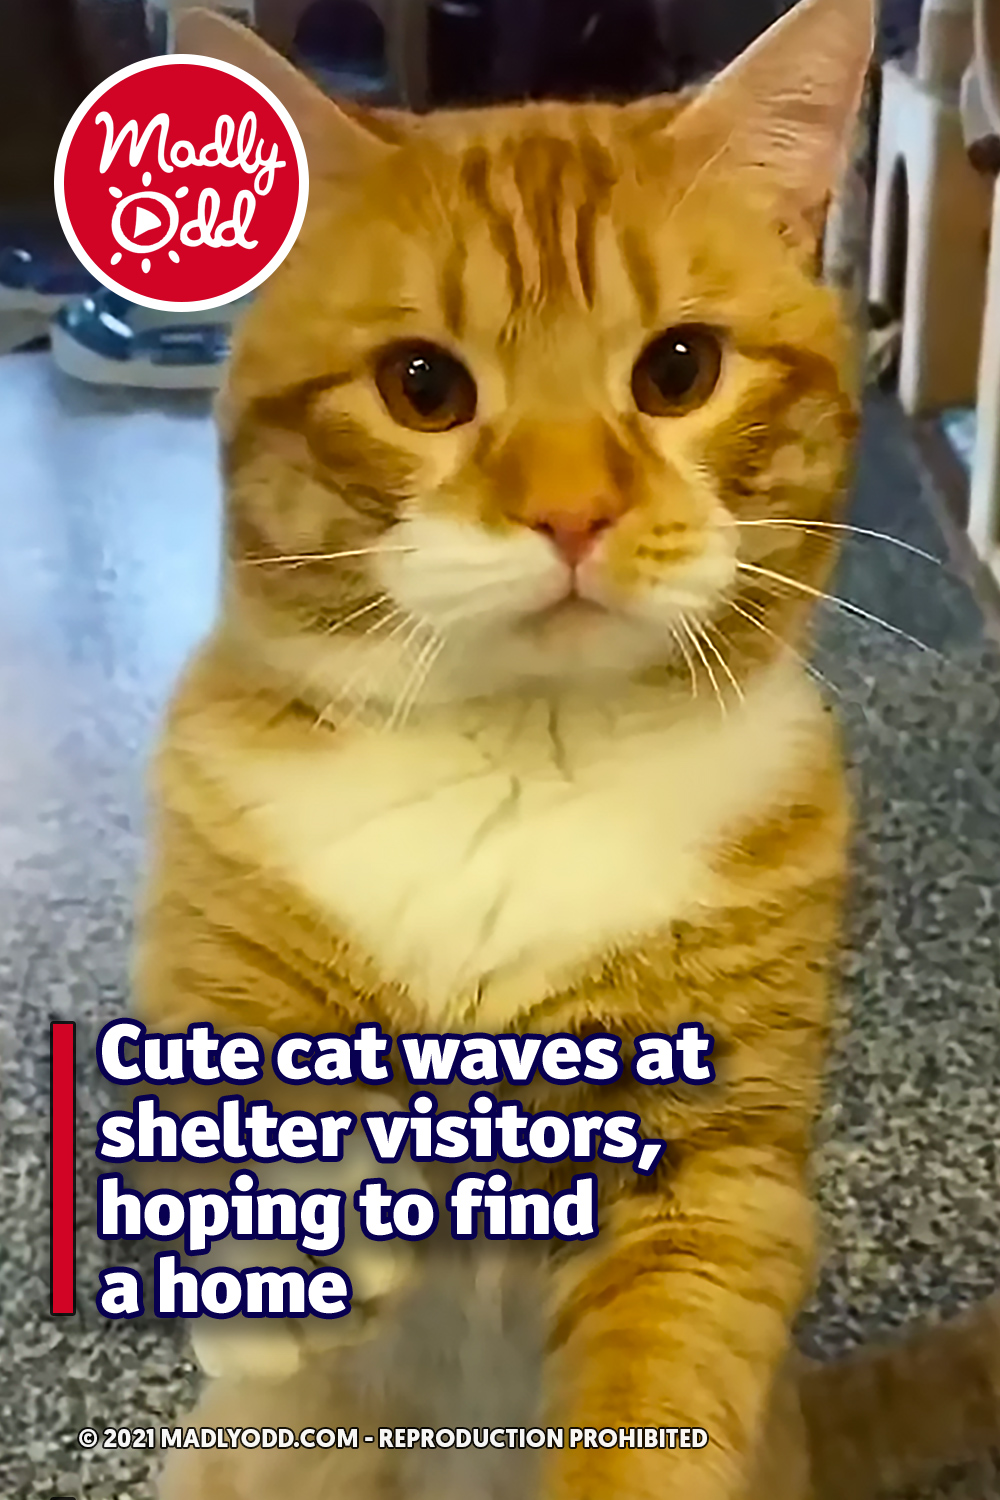 Cute cat waves at shelter visitors, hoping to find a home